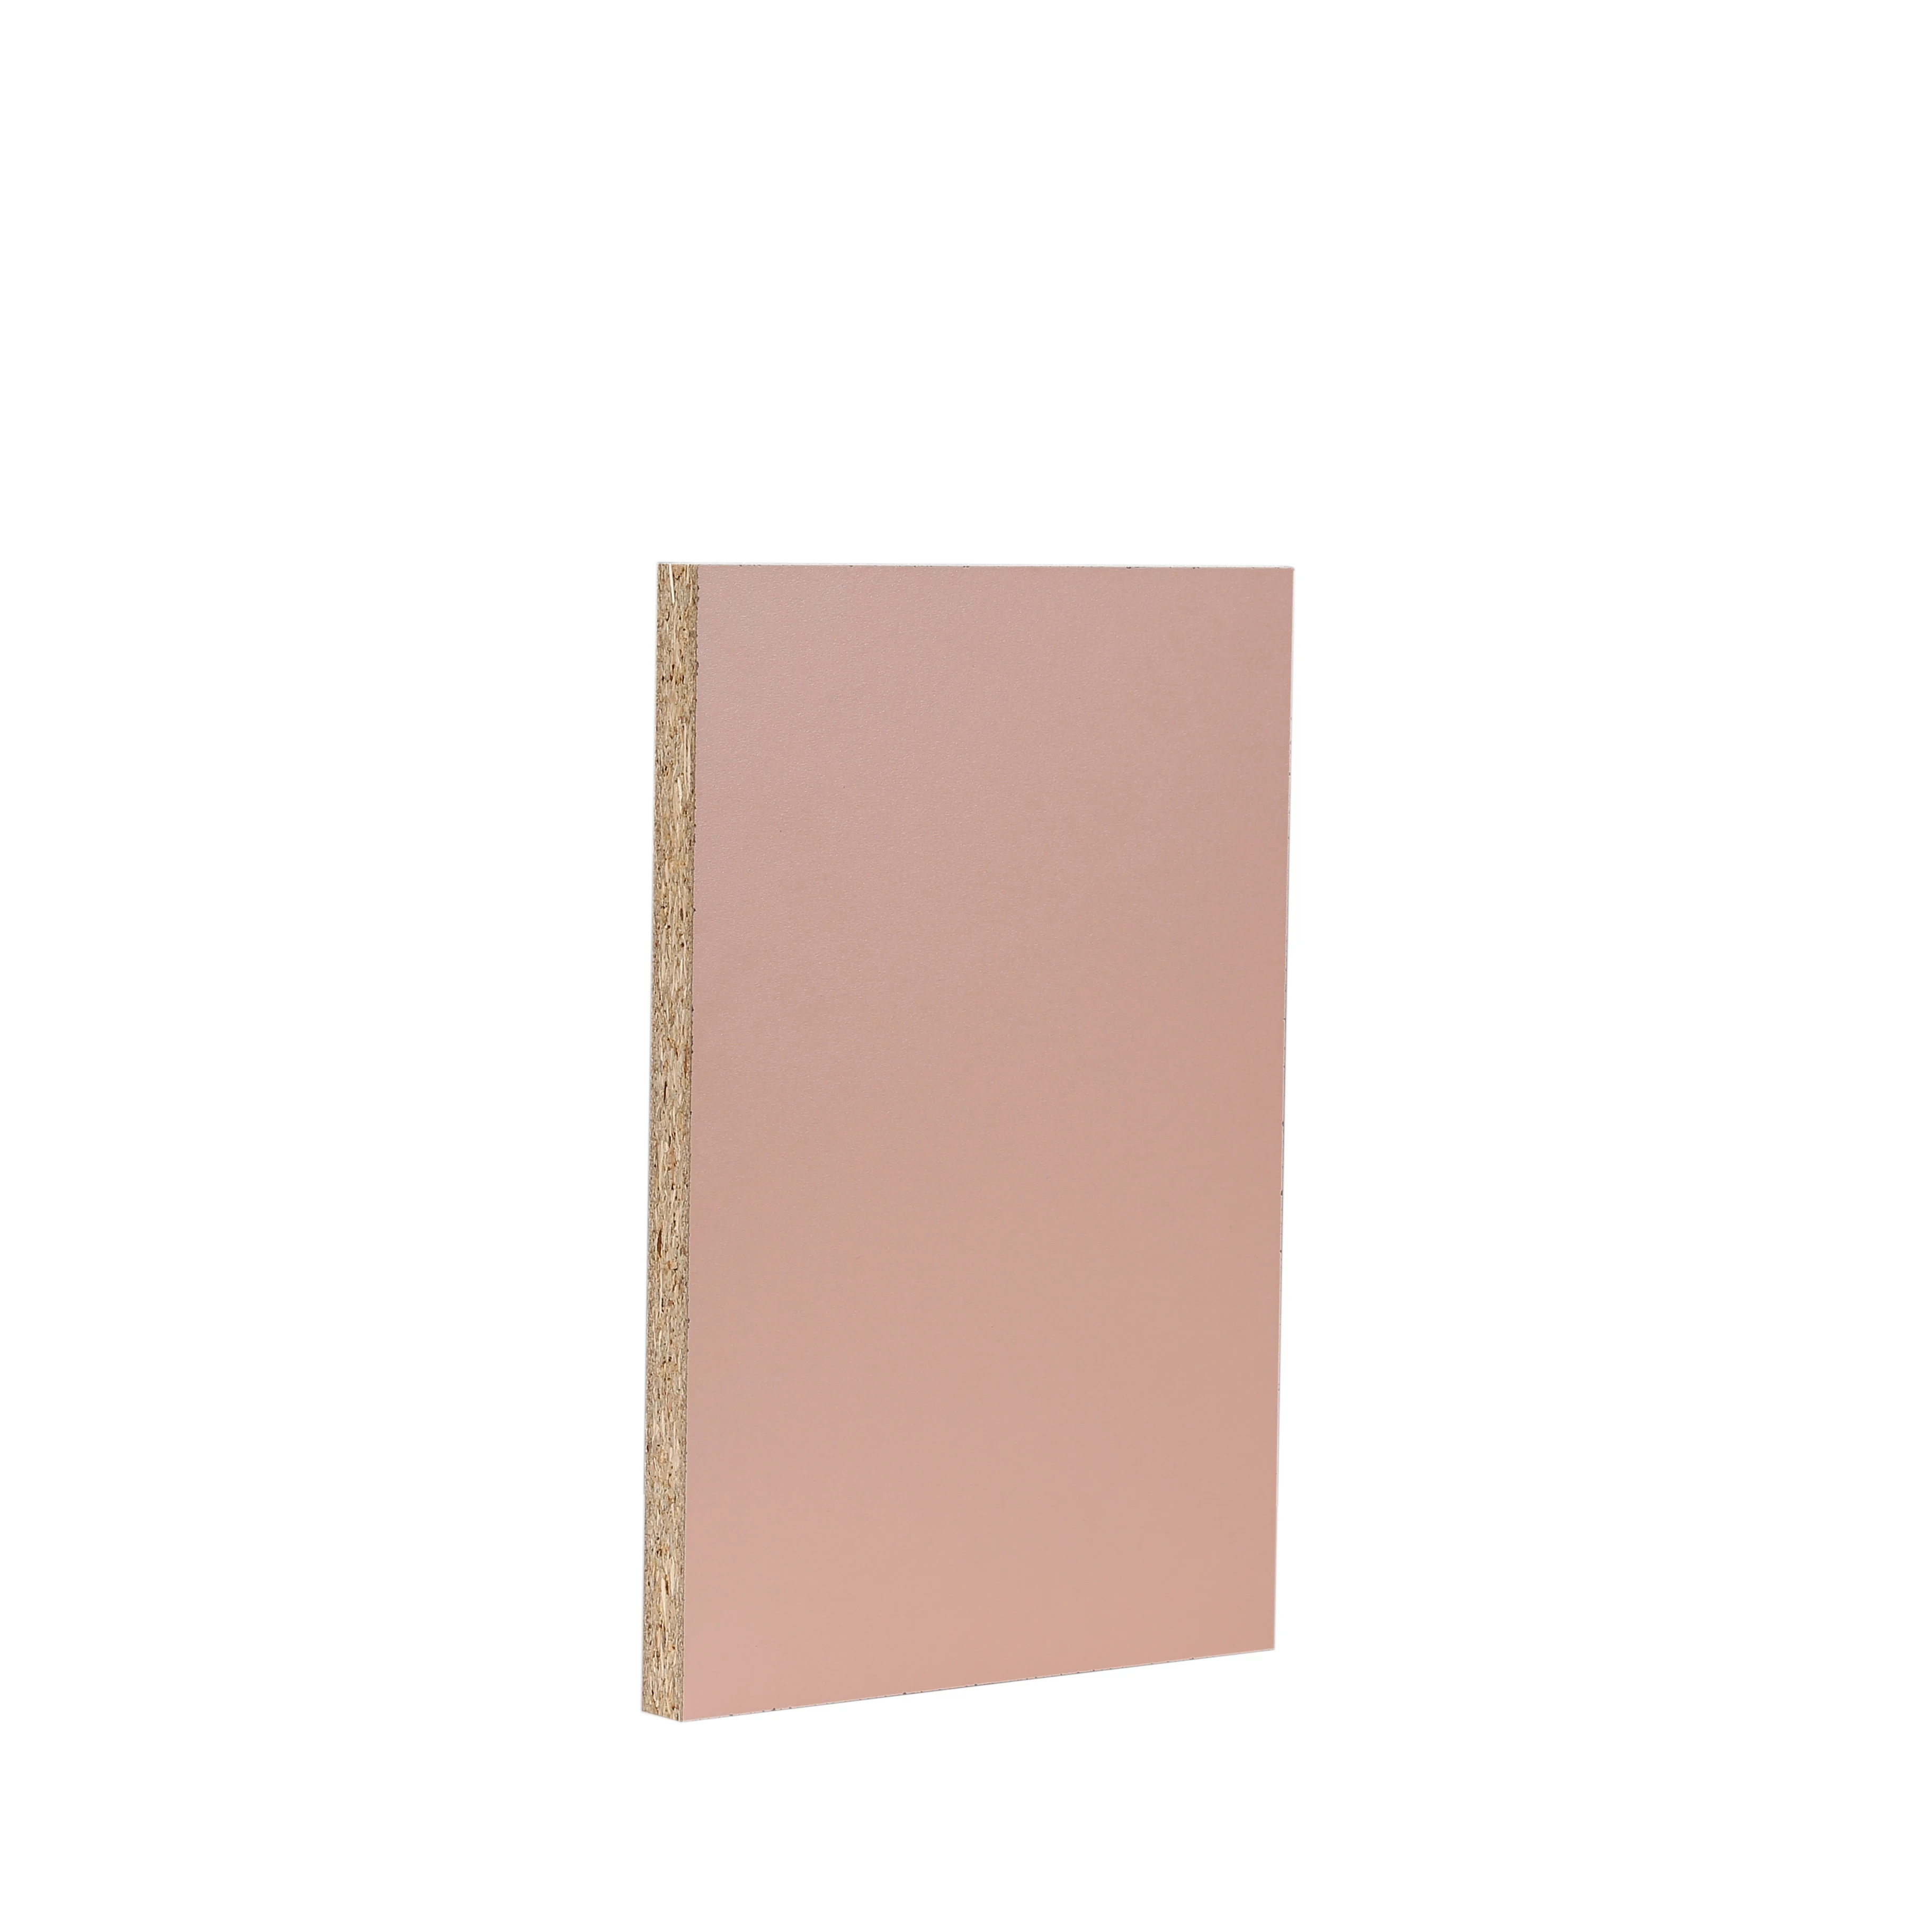 
18mm Melamine laminated particle board e1 Furniture Cabinet Use Moisture Proof Flakeboards Chip board sheets 